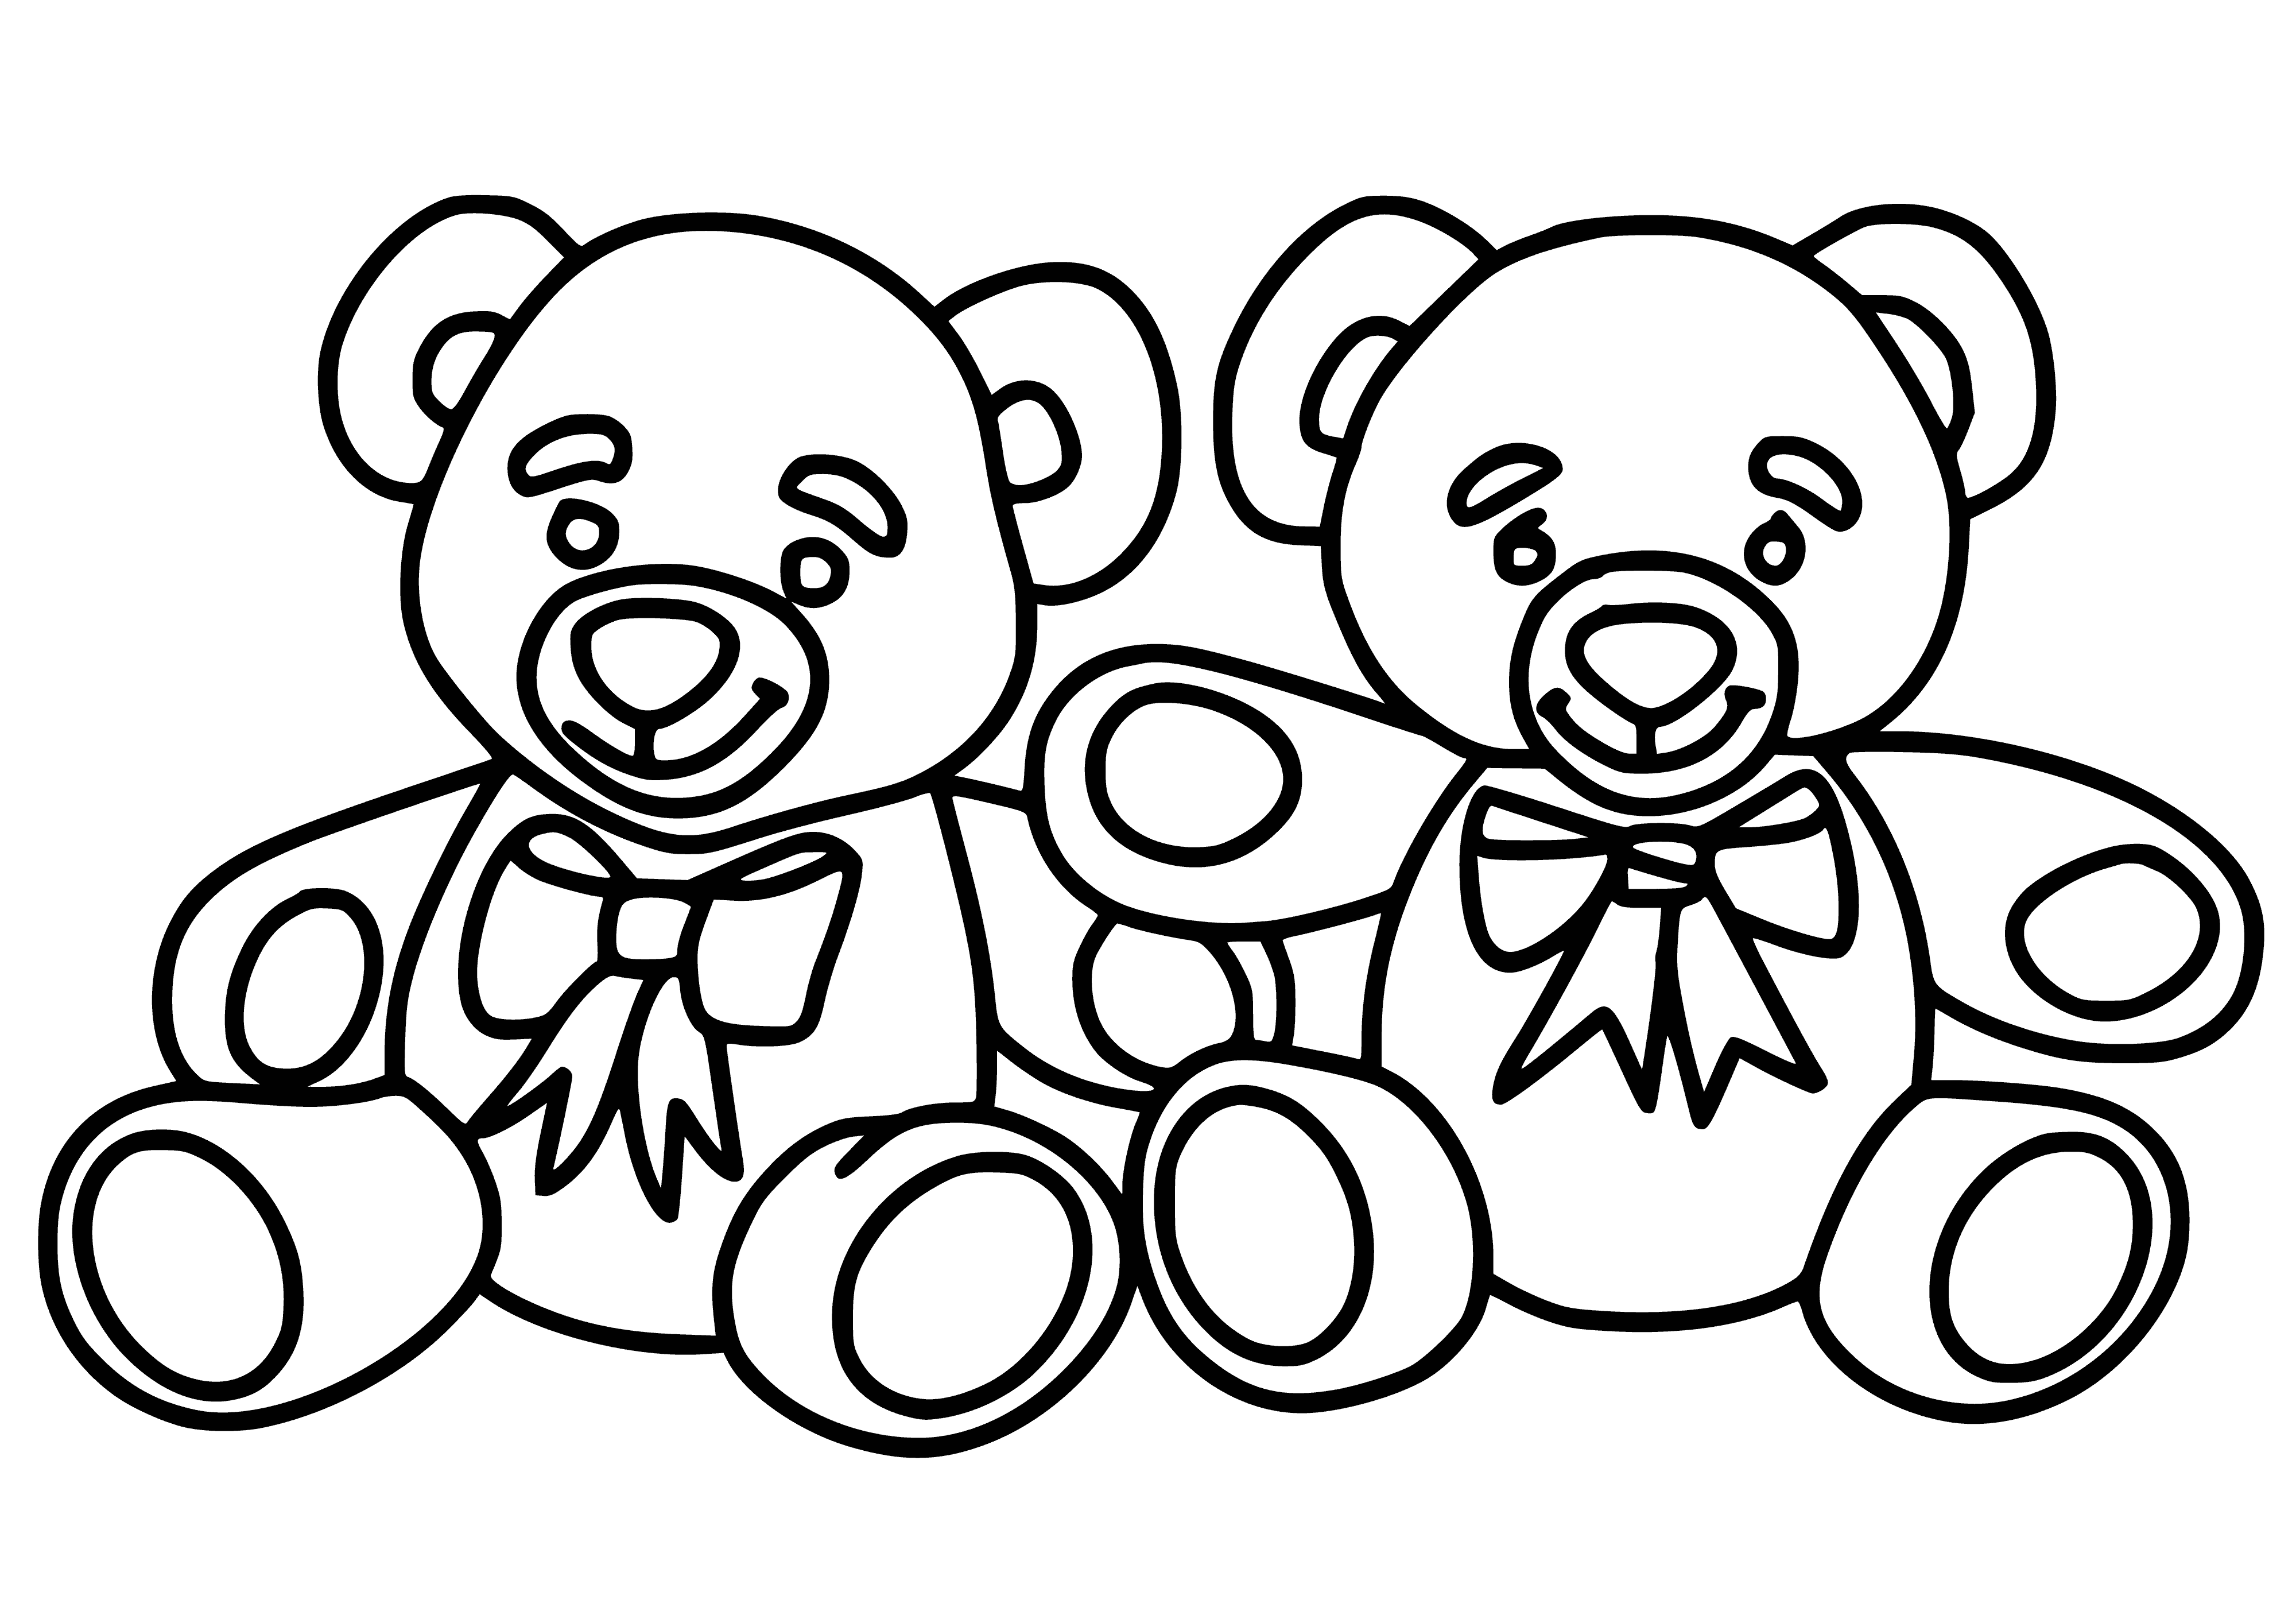 Mice coloring page